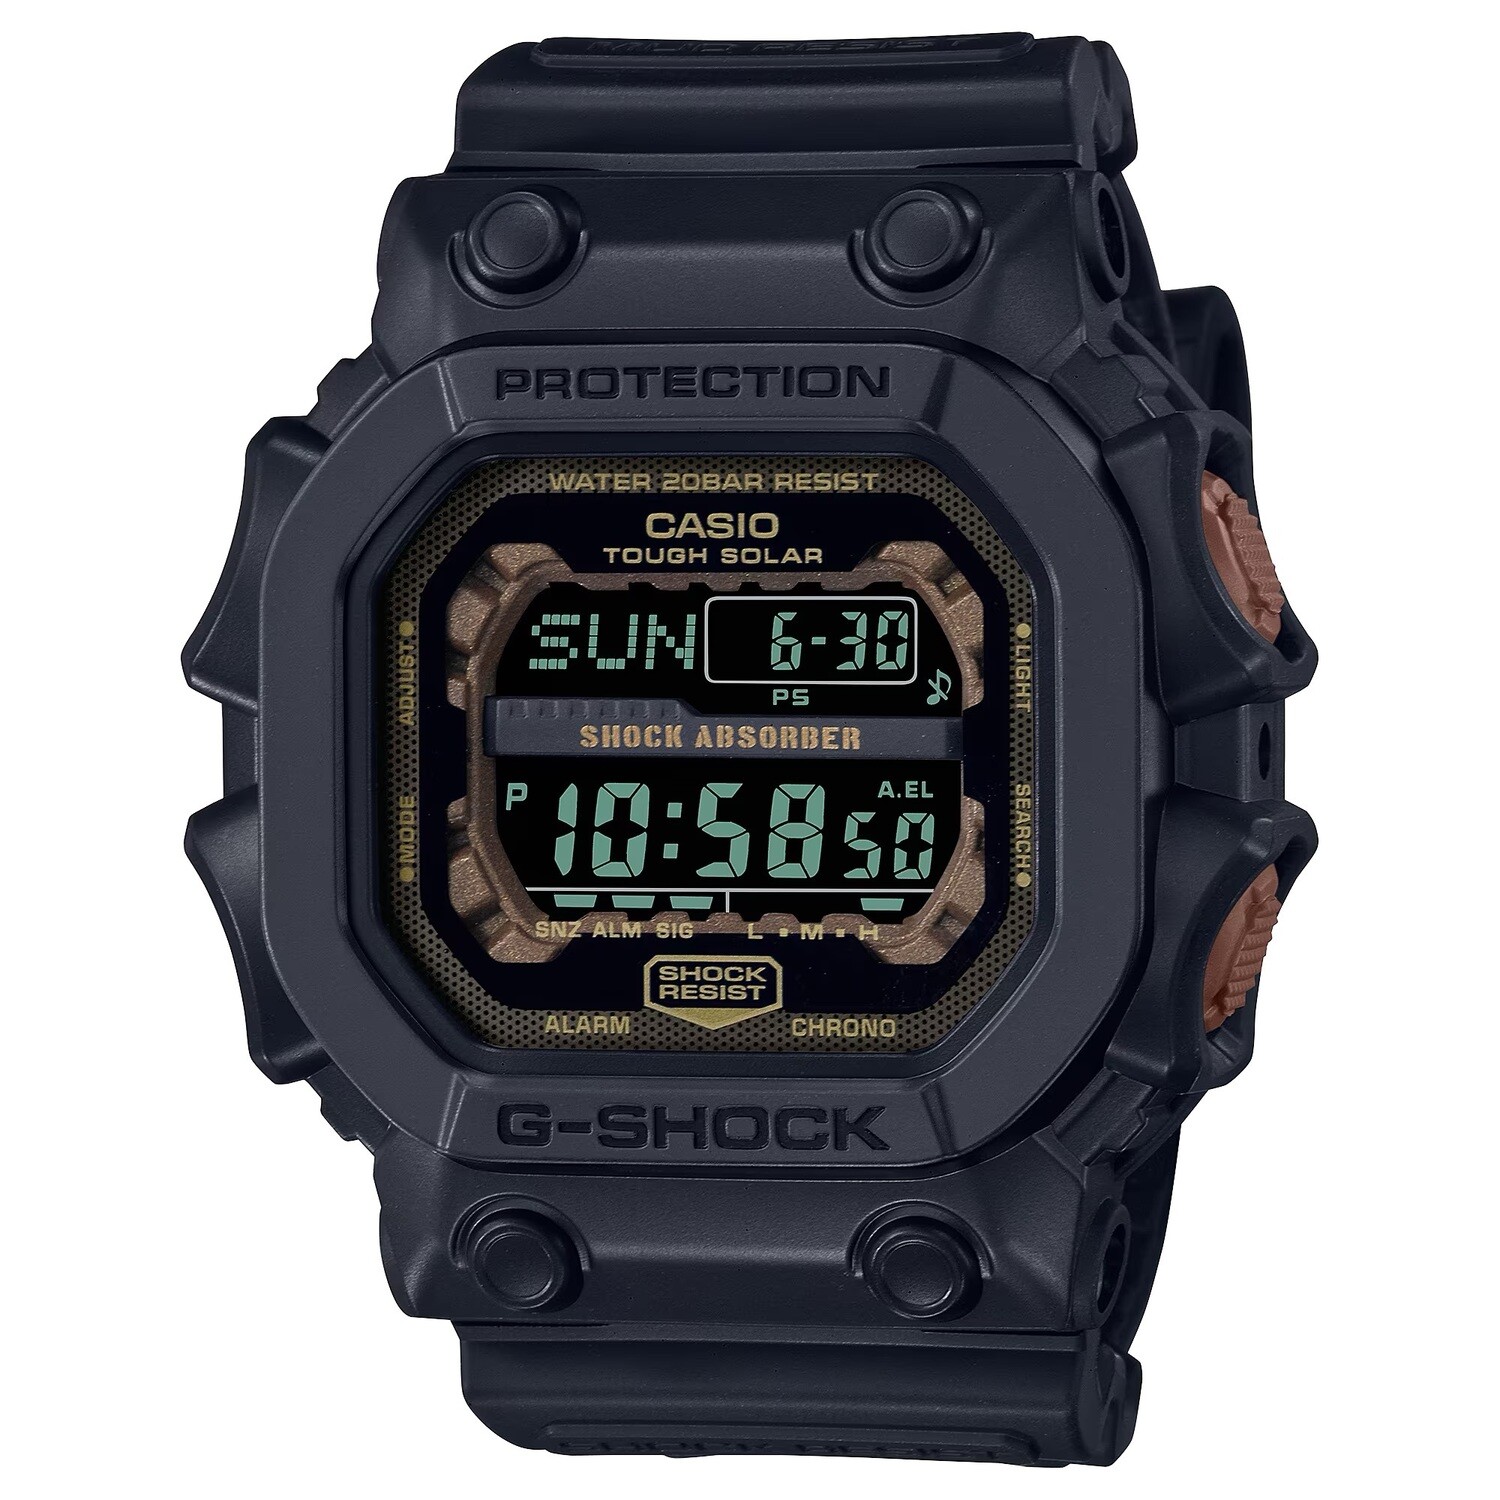 Casio G-Shock Tough Solar GX-56RC-1 Teal and Brown 200m WR World Time shock resist solar powered sport men’s watch